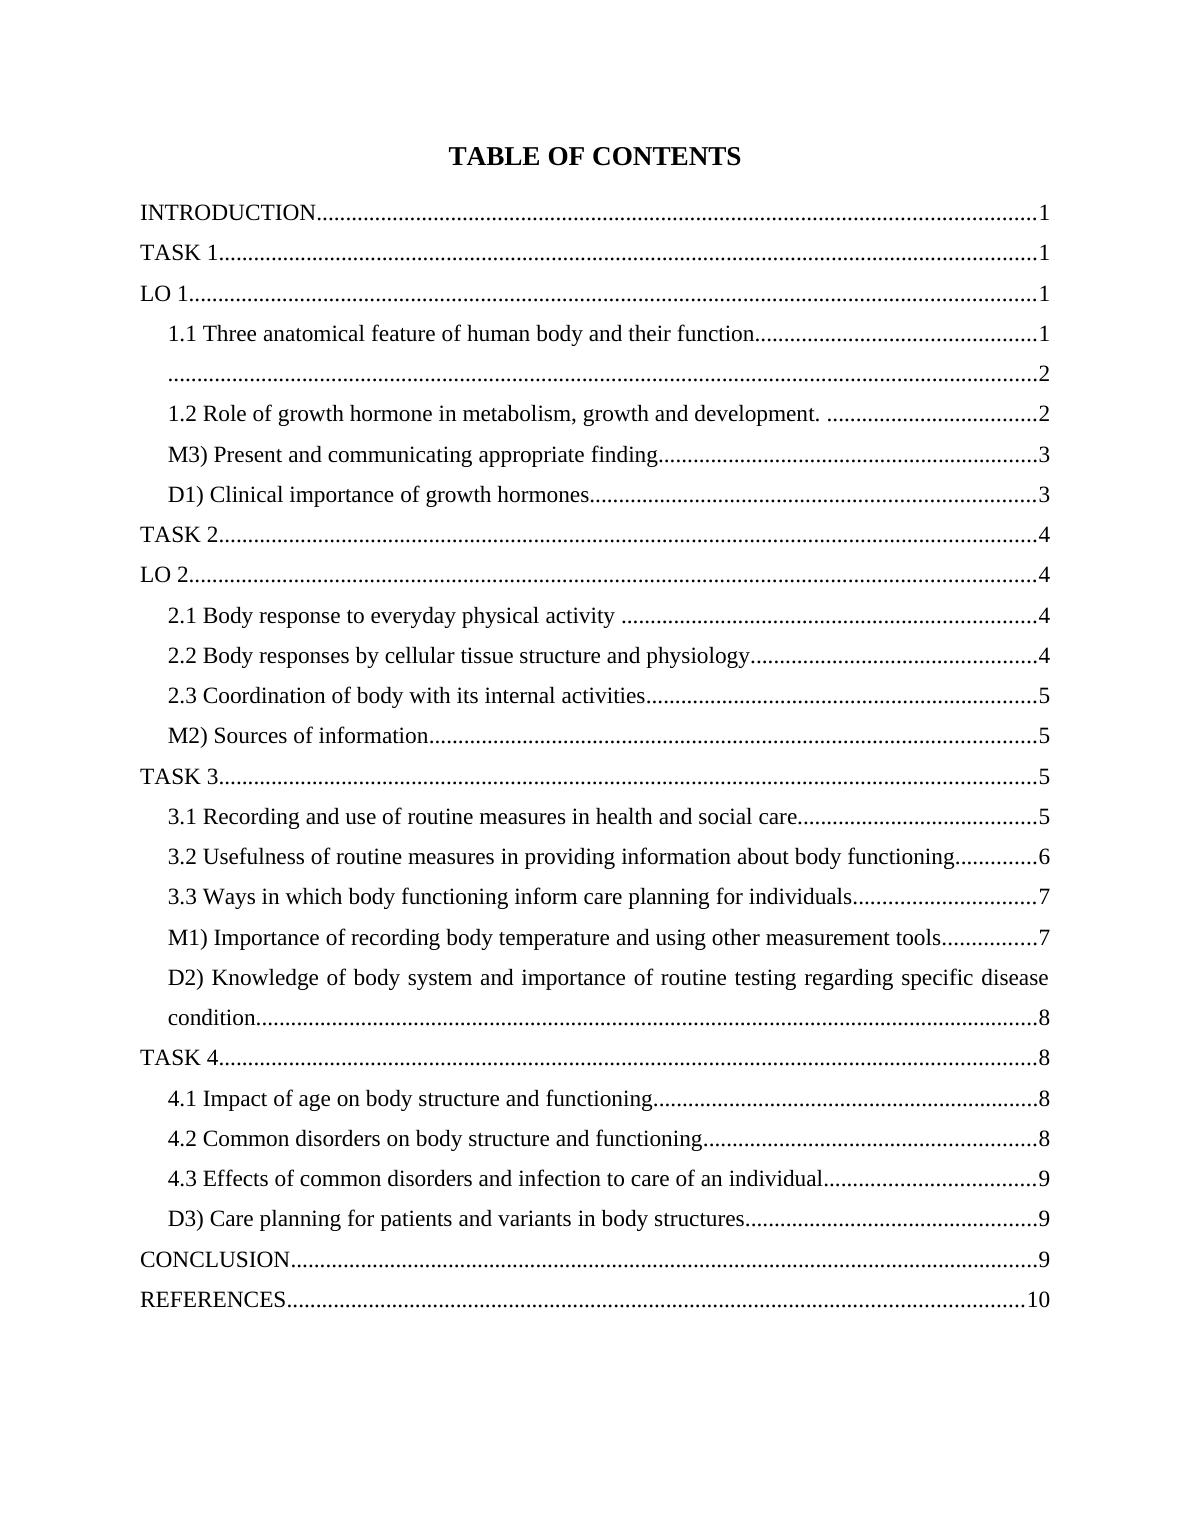 PHYSIOLOGICAL PRINCIPLES FOR HEALTH AND SOCIAL CARE TABLE OF CONTENTS_2